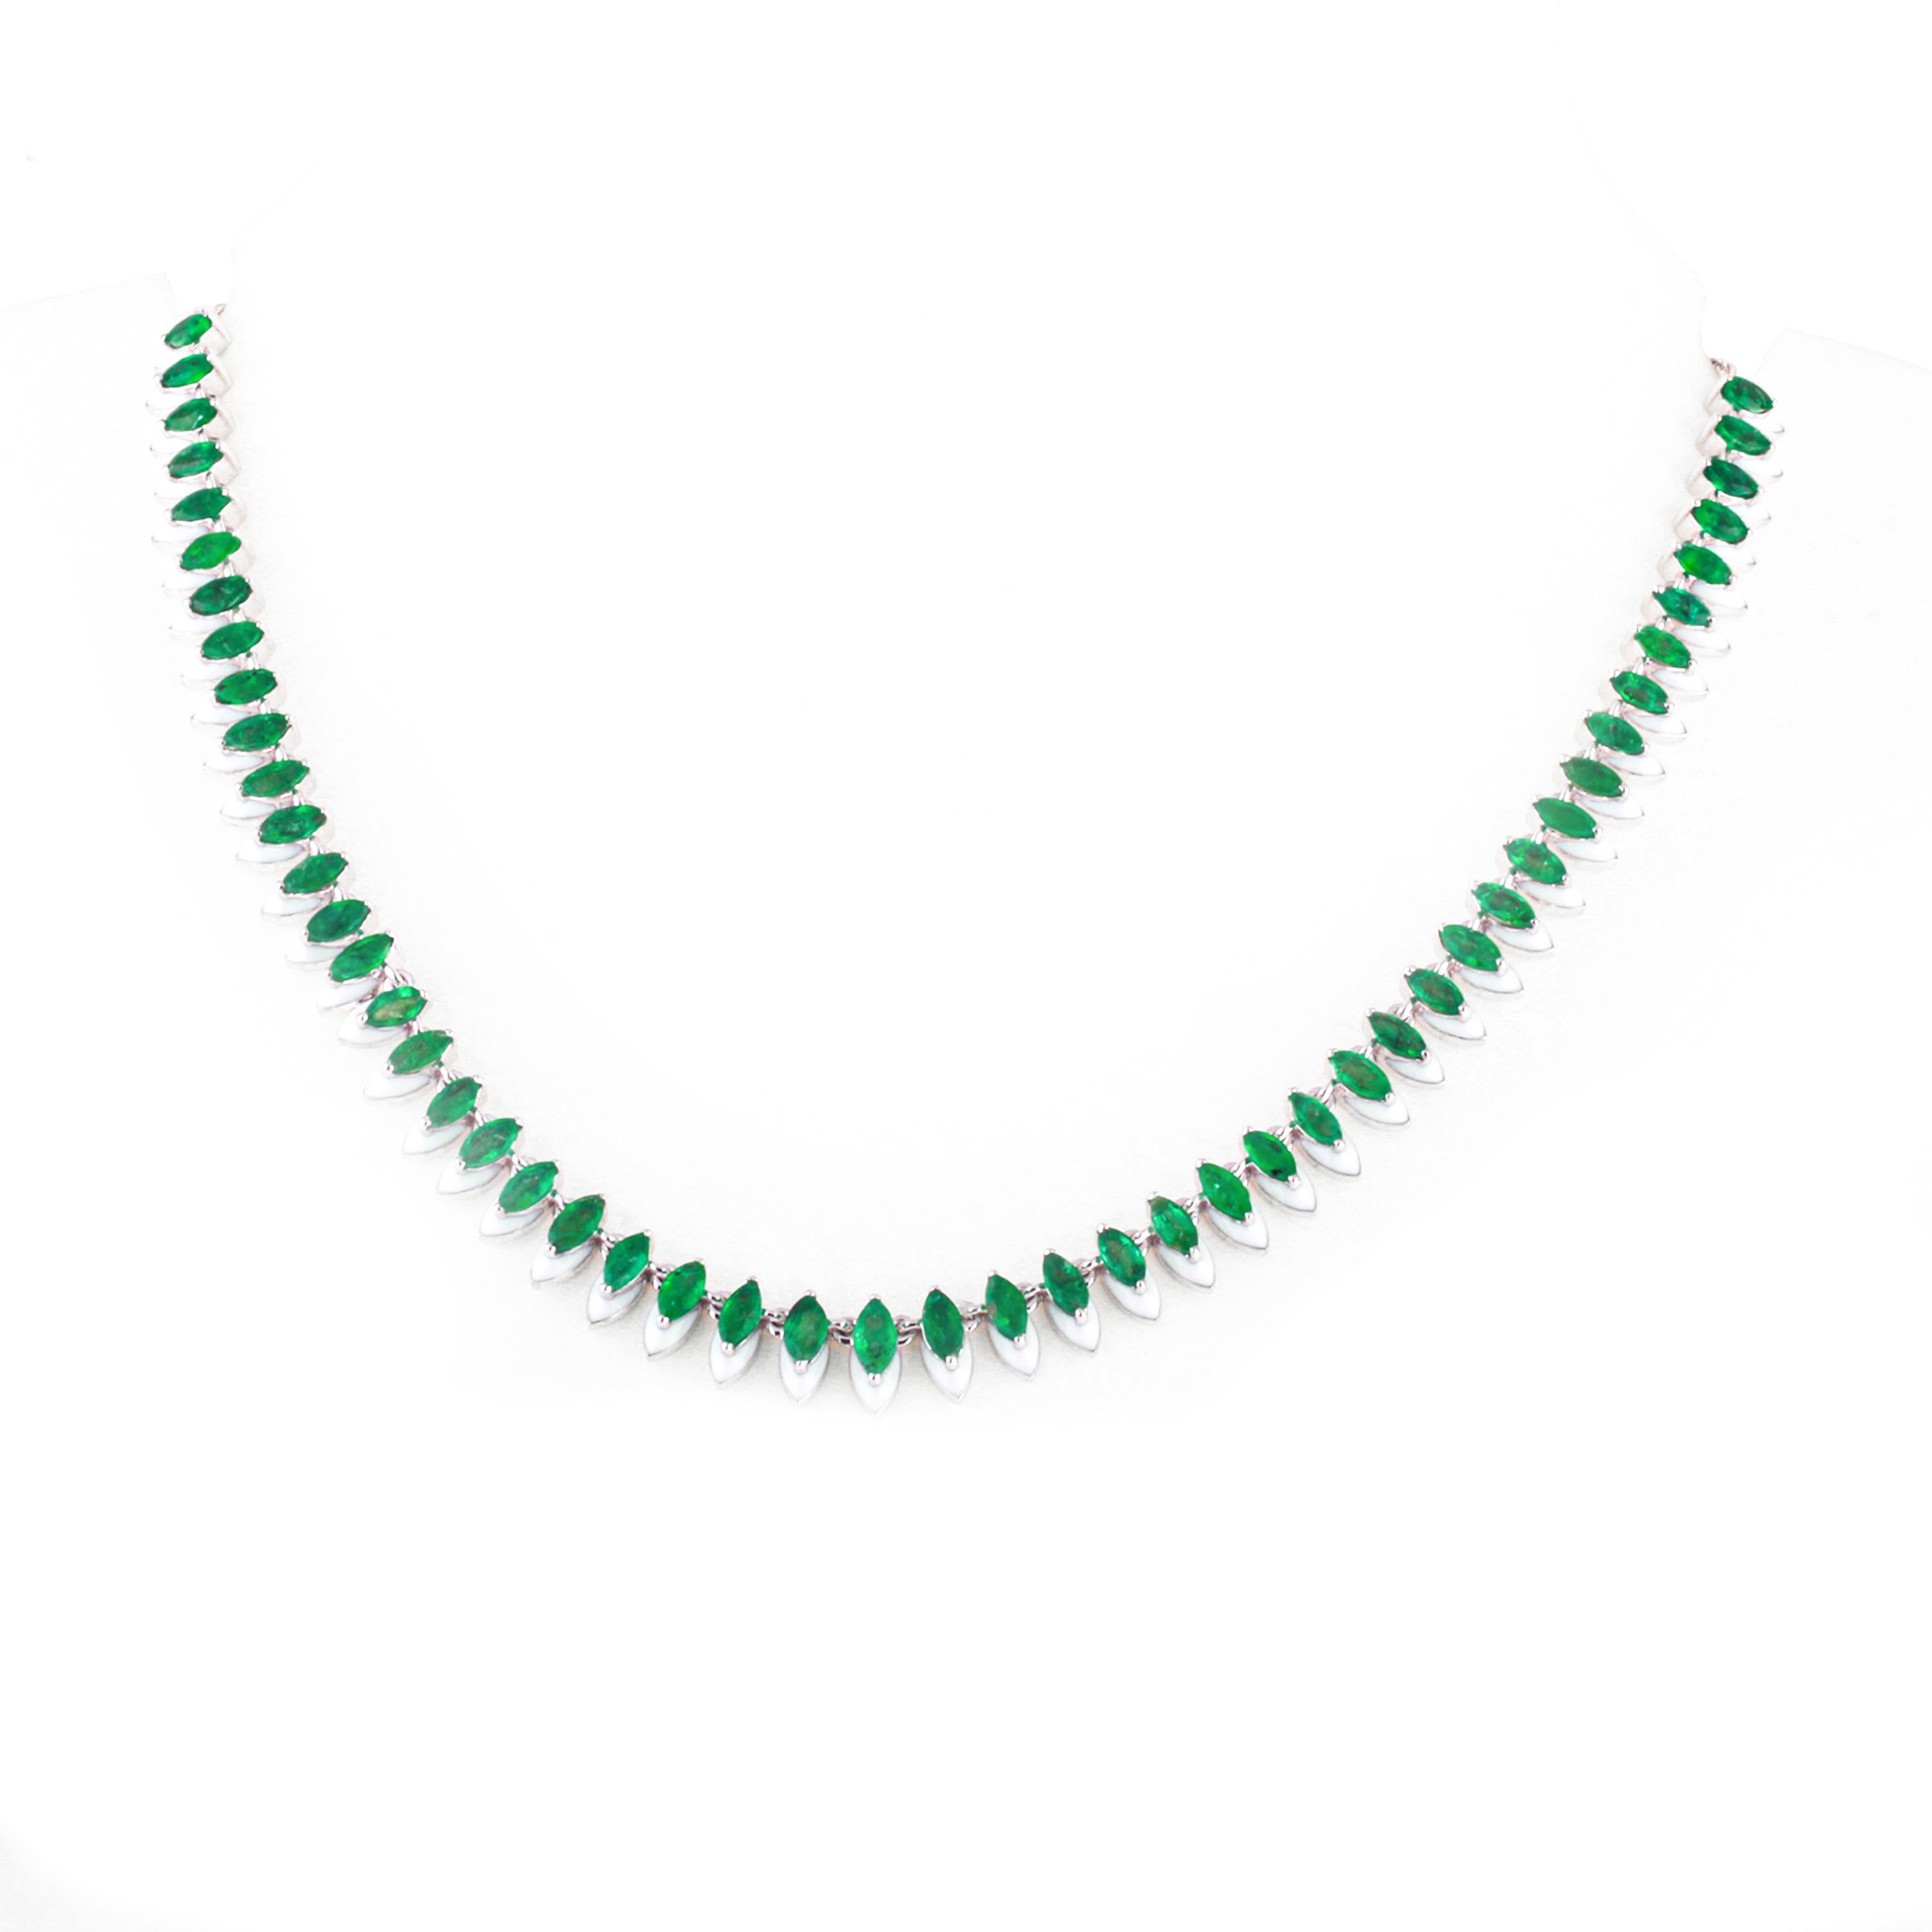 Marquise shape 0.20 carat Emeralds in a series, in combination with white  or twilight blue enamel. This choker is made in 18k white gold, and has a self adjustable ball chain mechanism. 